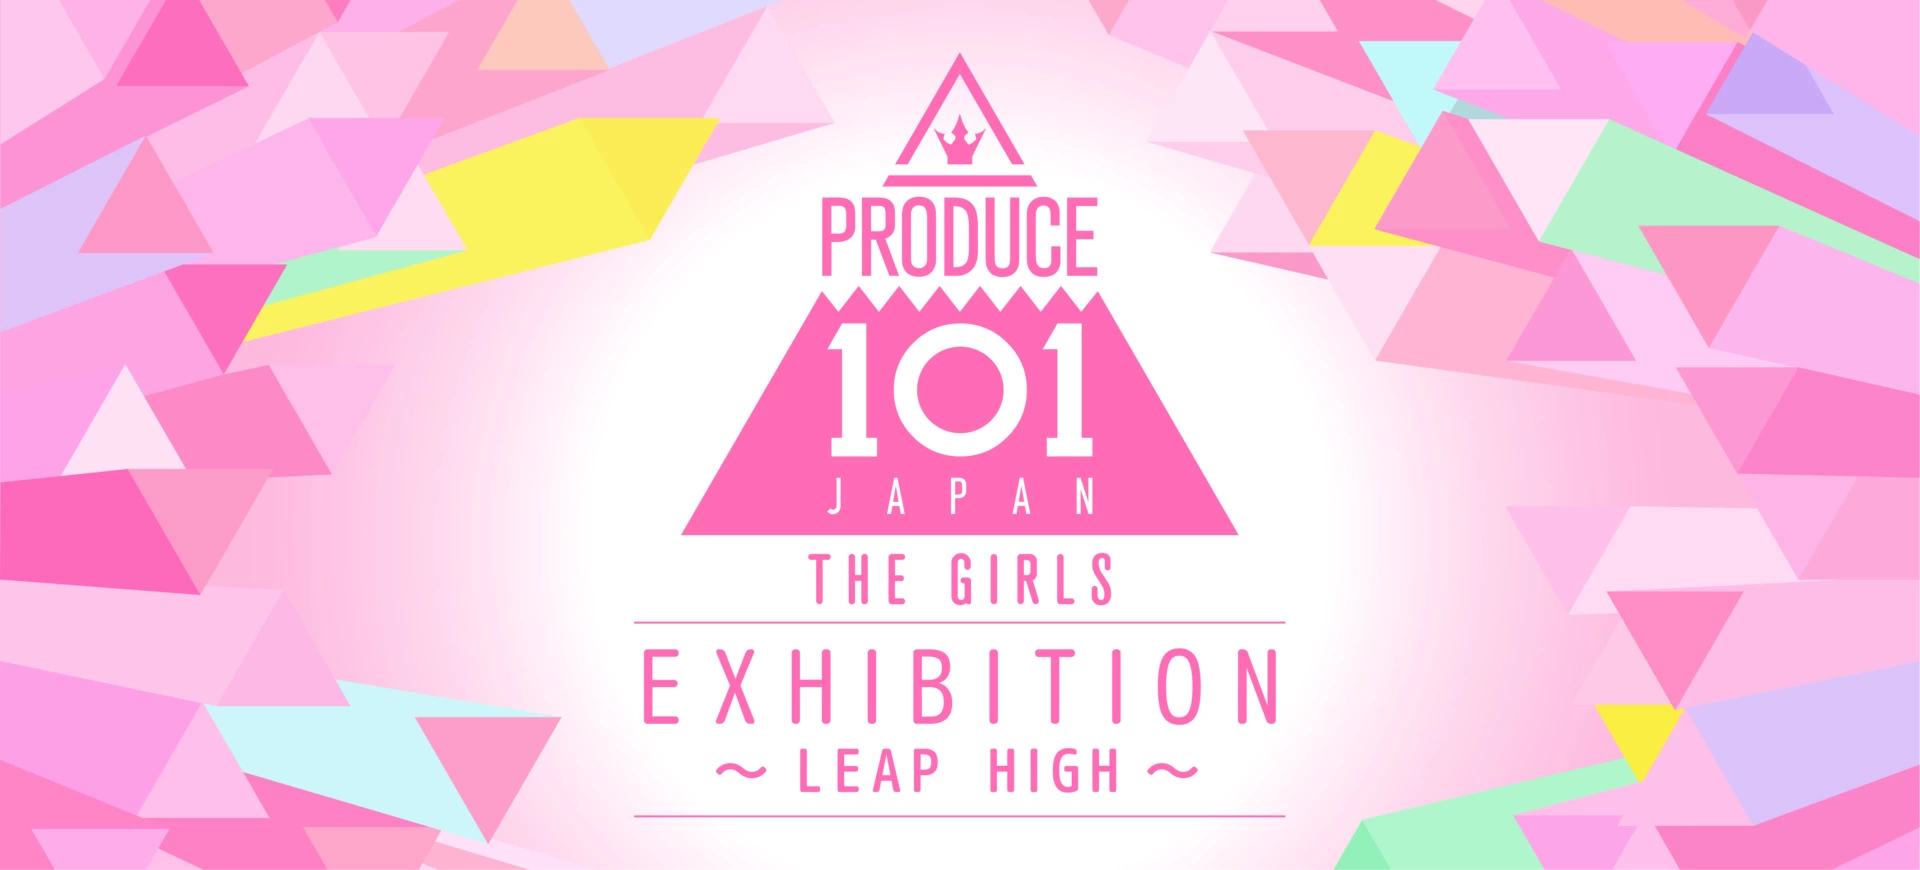 PRODUCE 101 JAPAN THE GIRLS EXHIBITION ～LEAP HIGH～